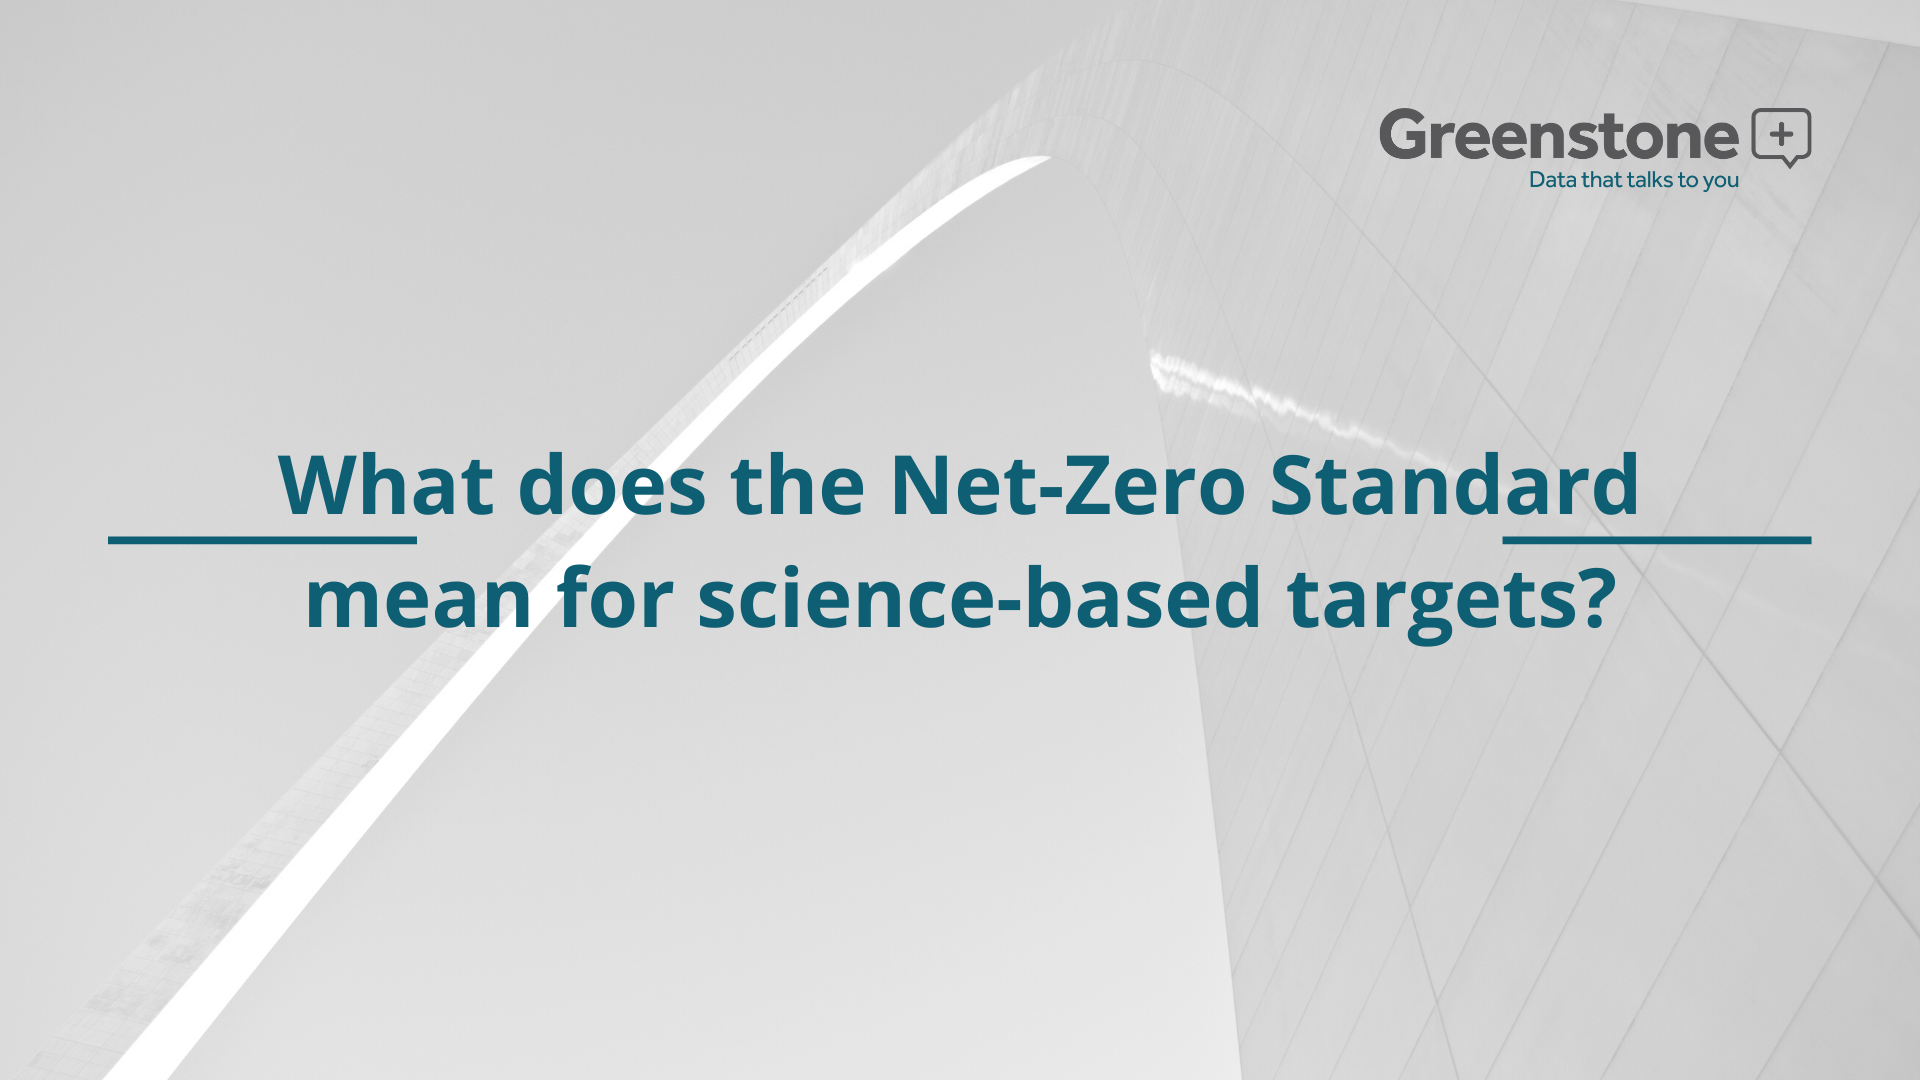 What does the Net-Zero Standard mean for science-based targets?